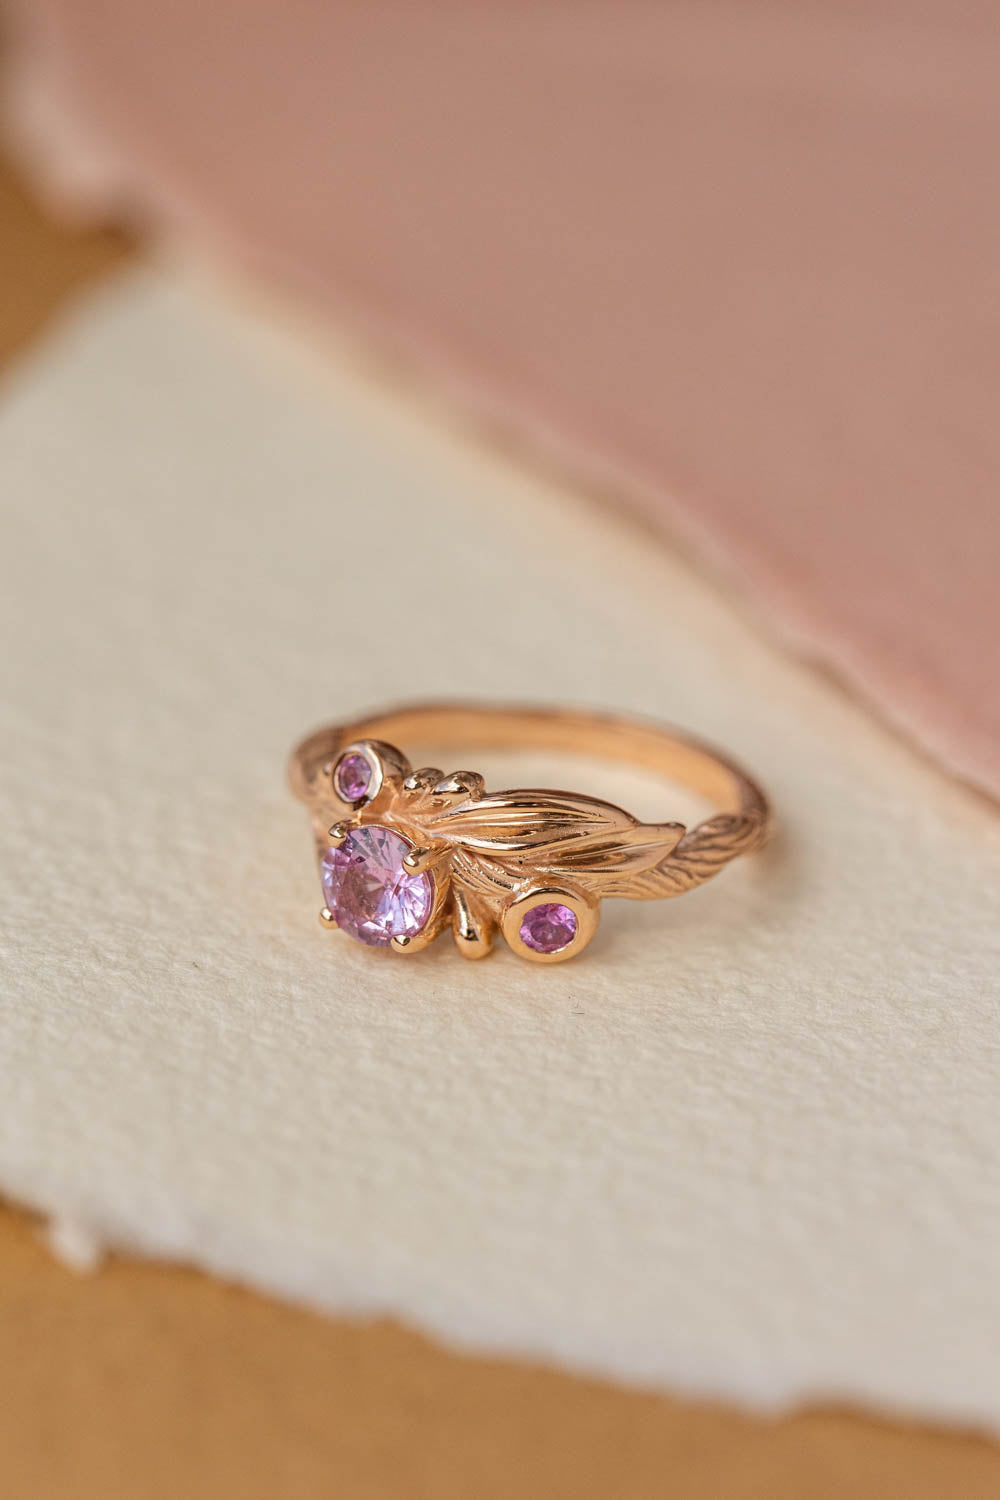 Pink sapphires engagement ring, olive branch gold ring with sapphires / Olivia - Eden Garden Jewelry™